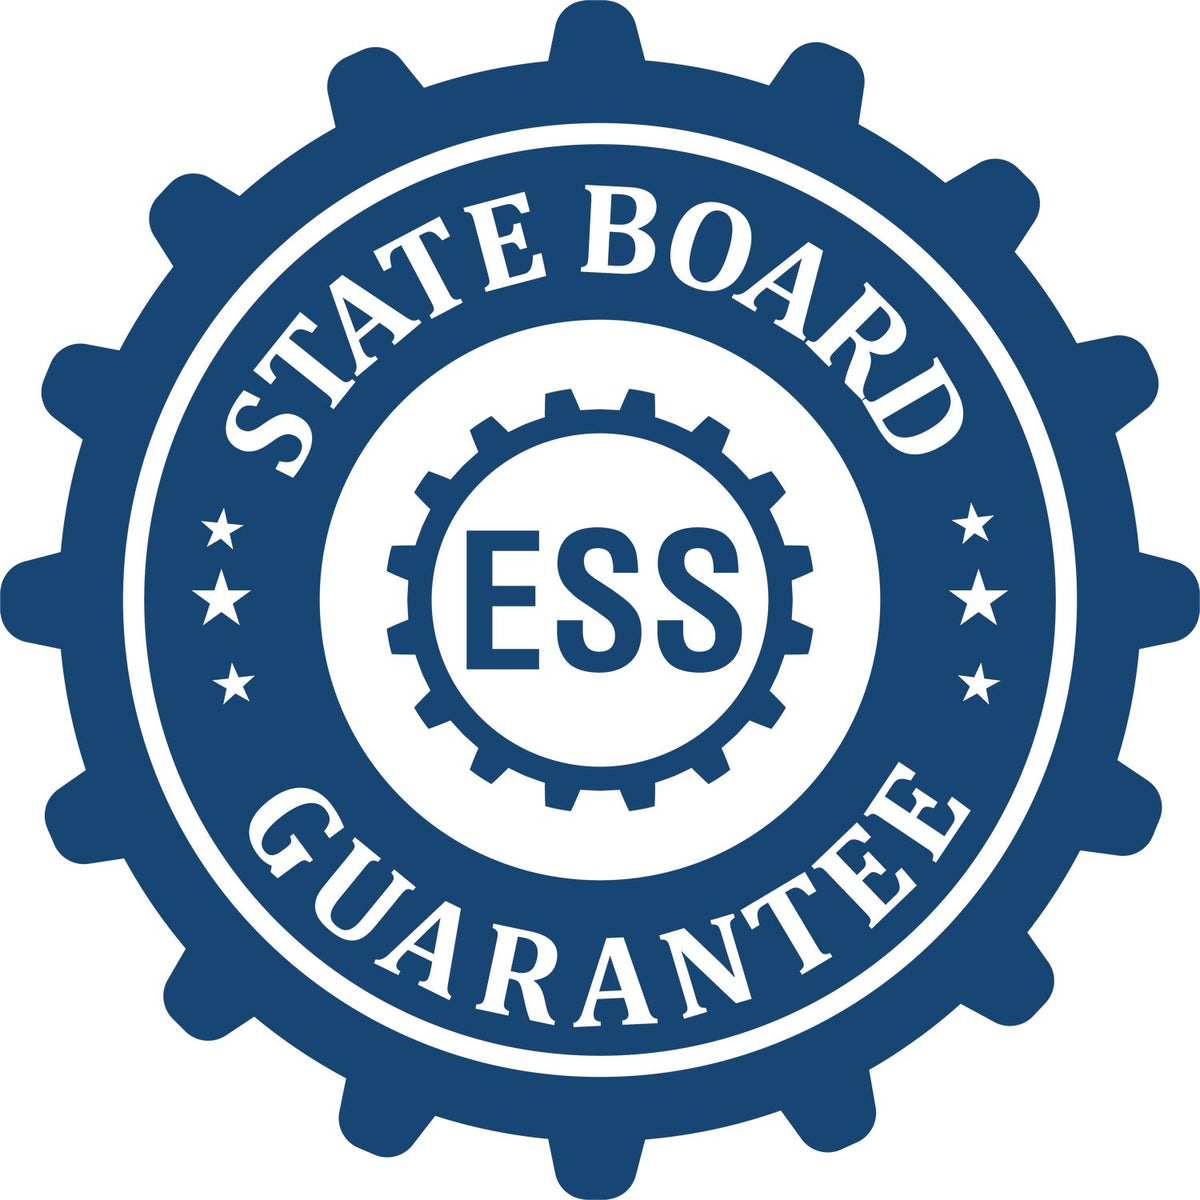 An emblem in a gear shape illustrating a state board guarantee for the Premium MaxLight Pre-Inked Michigan Engineering Stamp product.